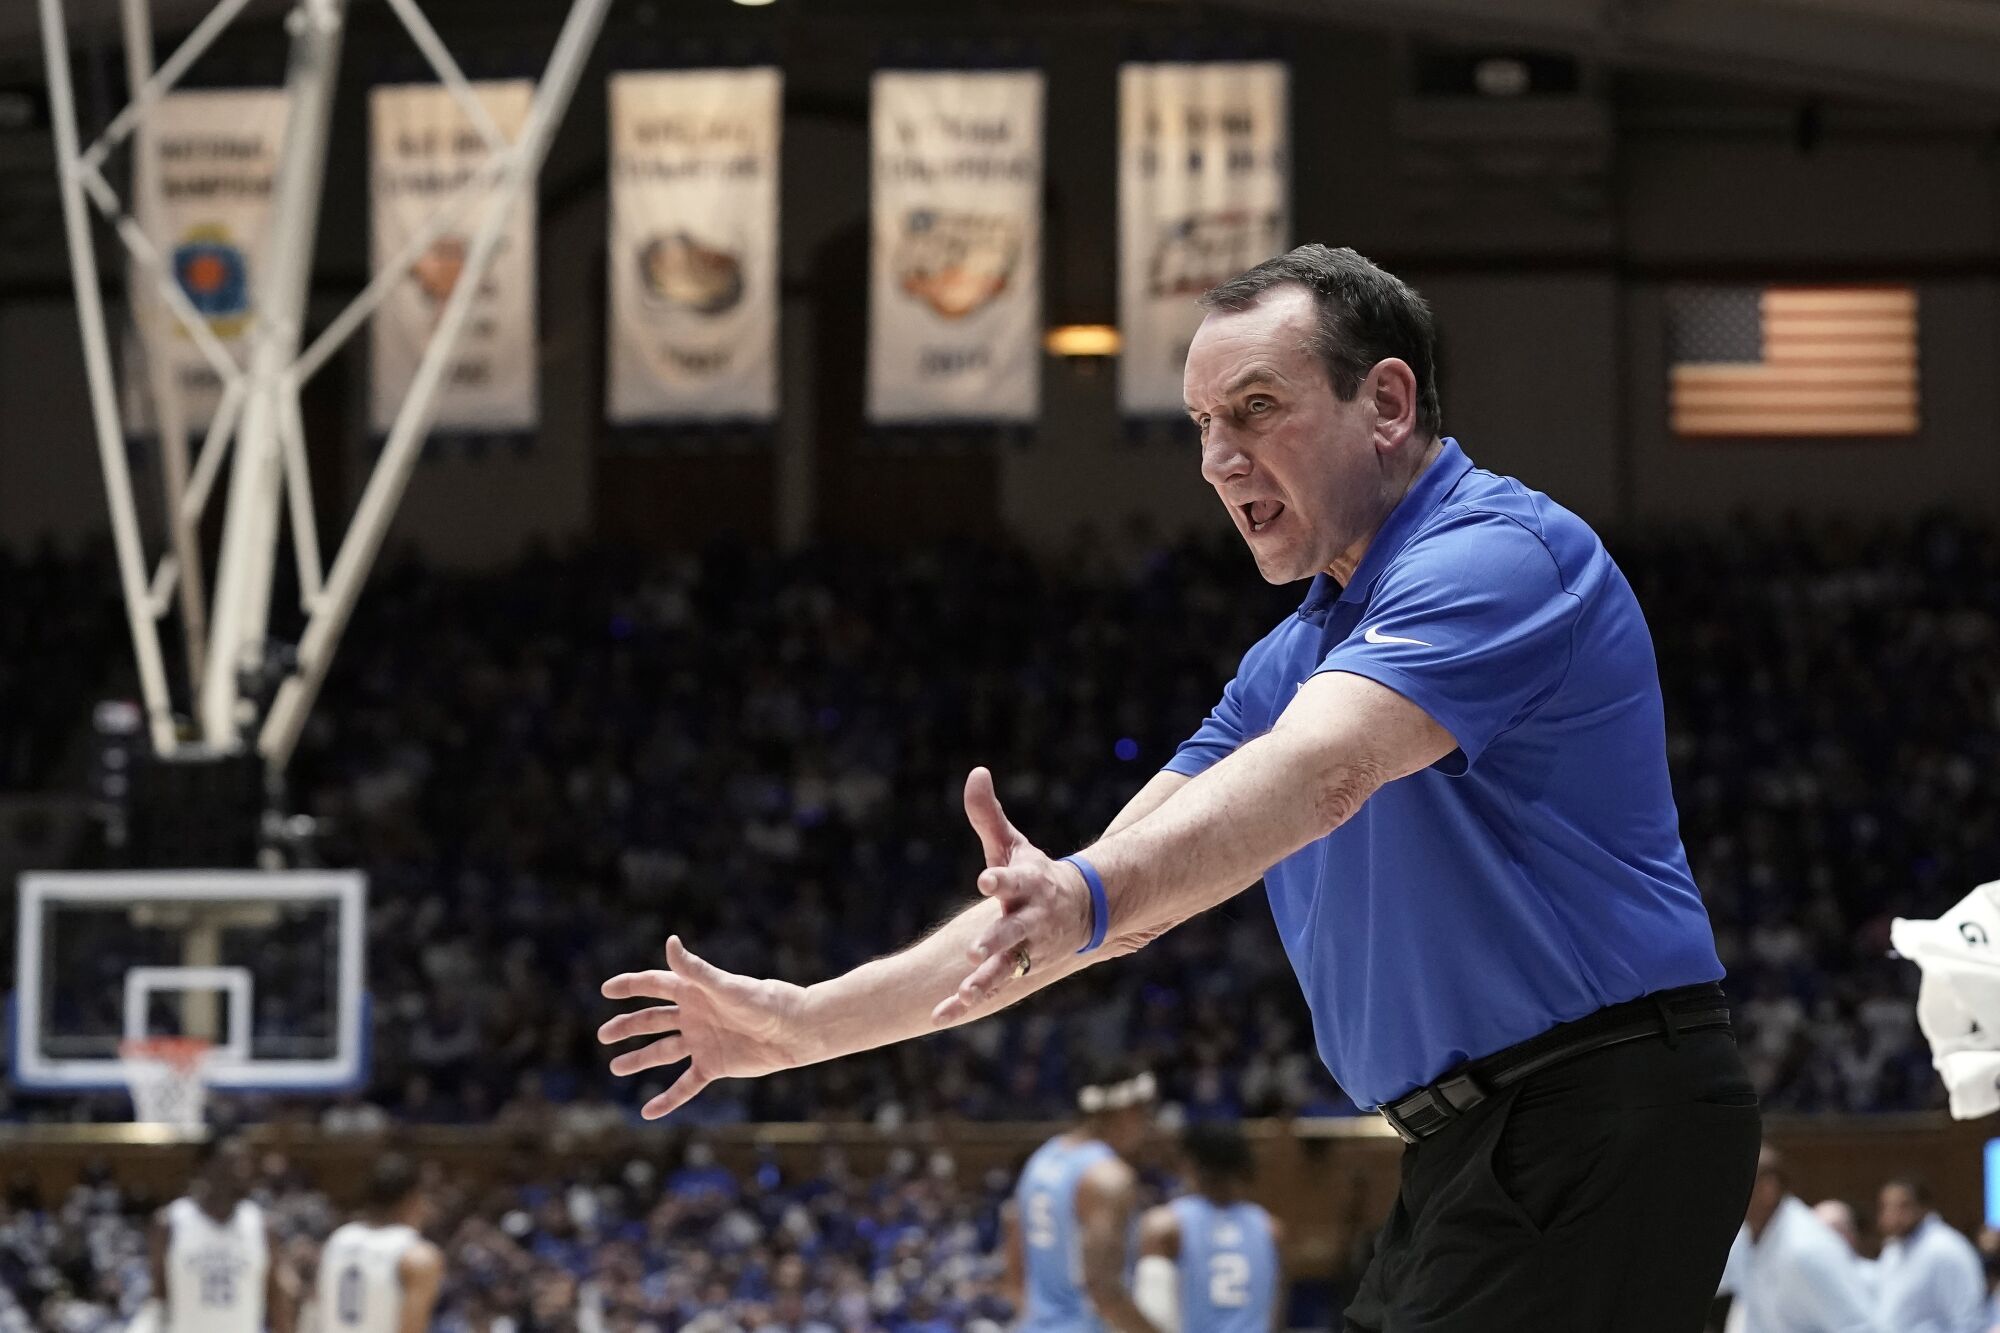 Duke coach Mike Krzyzewski instructs his players during the second half of the Blue Devils' 94-81 loss to North Carolina.